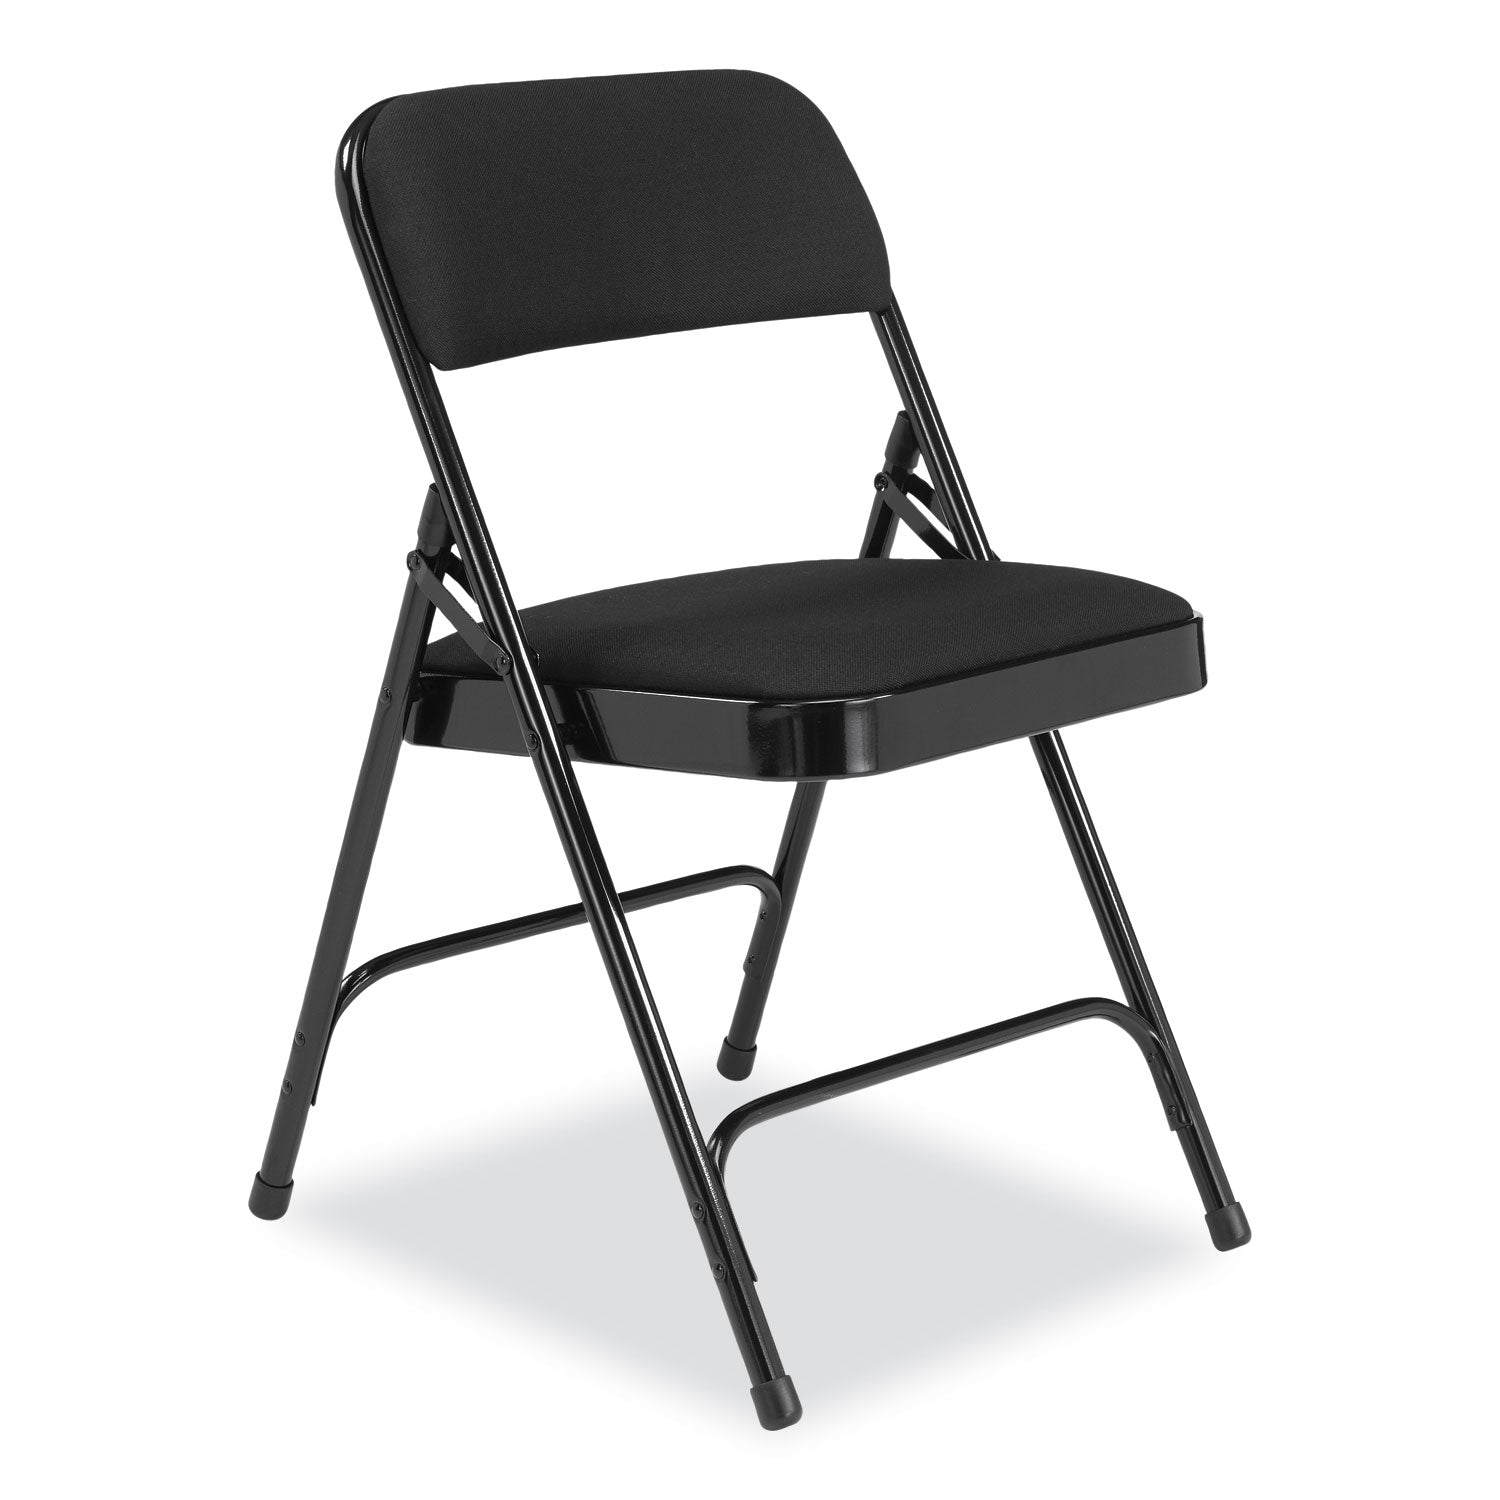 2200-series-fabric-dual-hinge-folding-chair-supports-500-lb-midnight-black-seat-back-black-base4-ctships-in-1-3-bus-days_nps2210 - 2